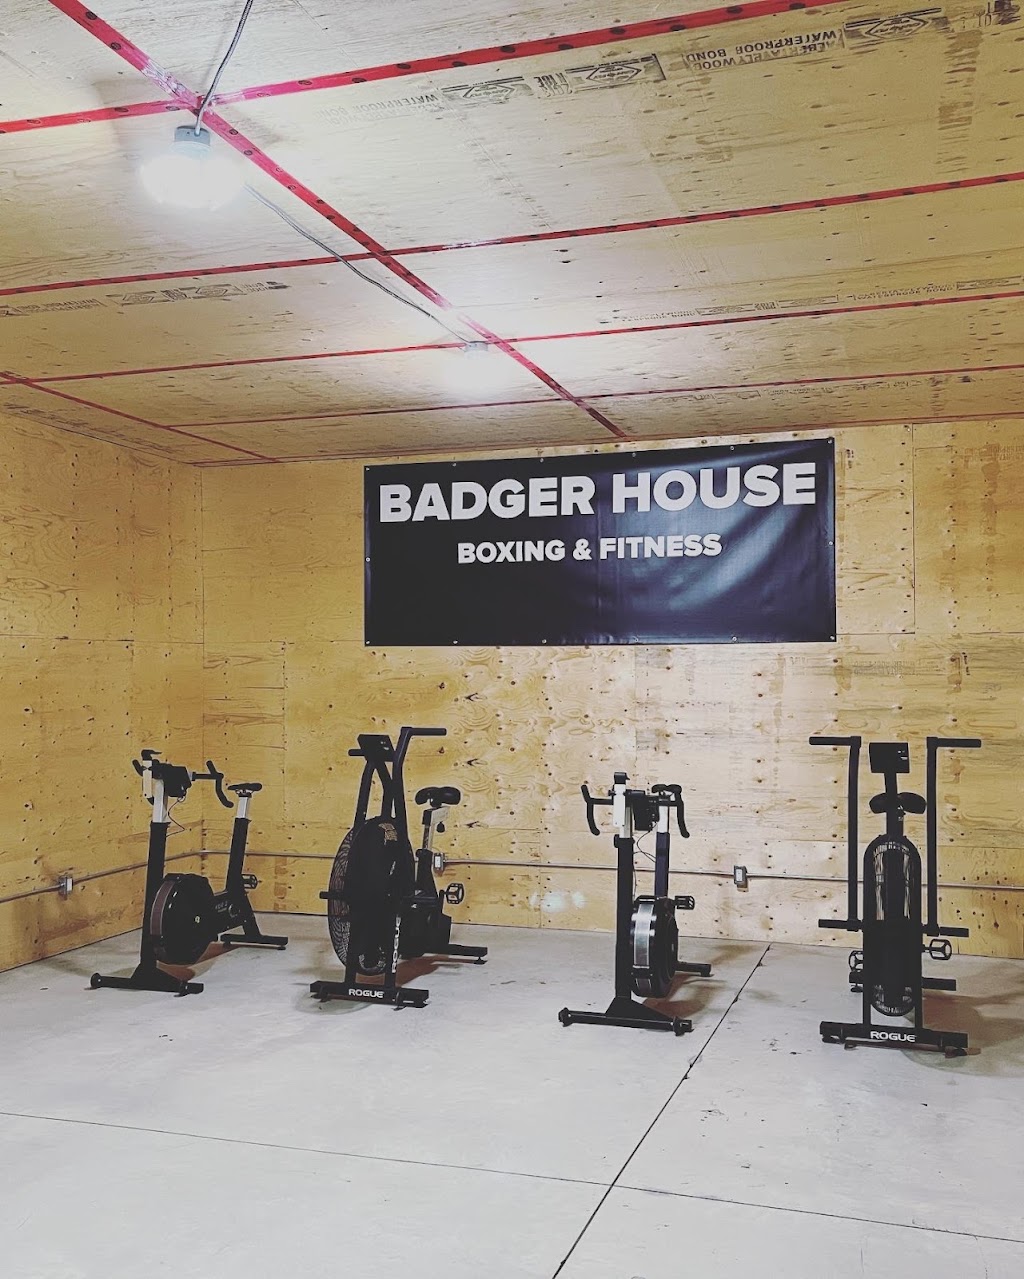 Badger House Boxing & Fitness | gym | 20 College Ave, Vittoria, ON N0E 1W0, Canada | 5194958182 OR +1 519-495-8182